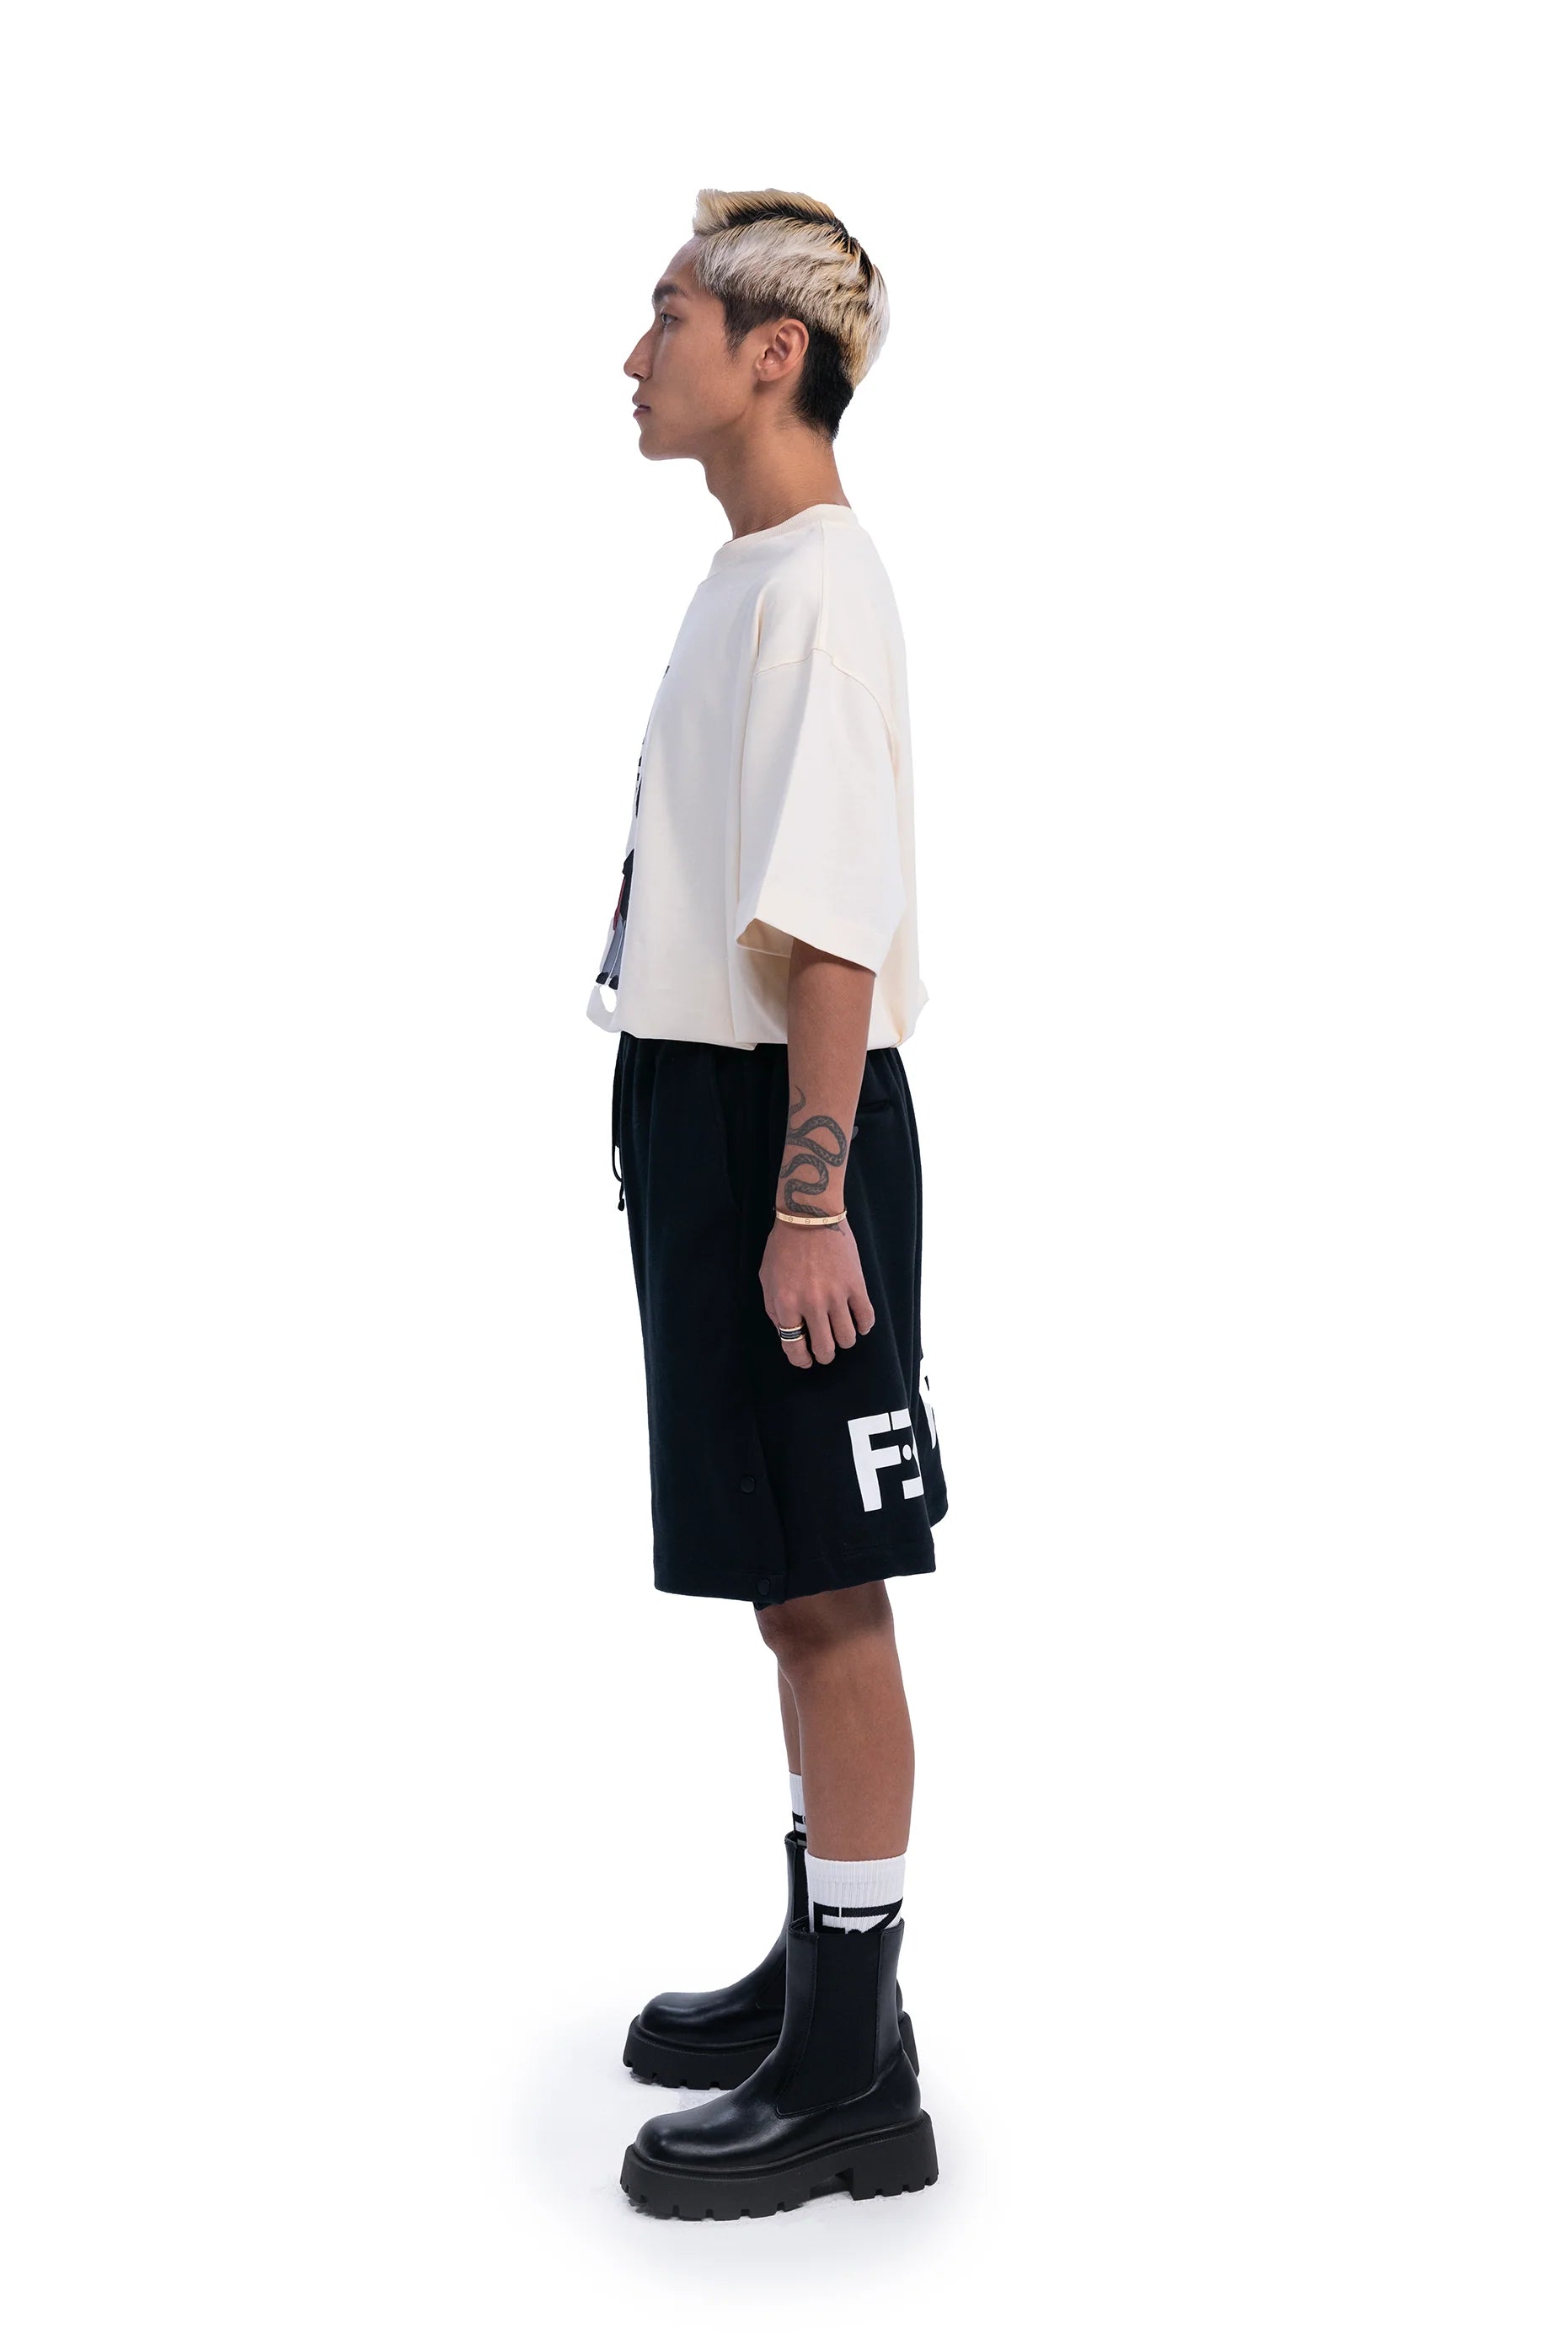 FREEMINDS UNISEX BLACK RELAX FIT FRENCH TERRY SHORT